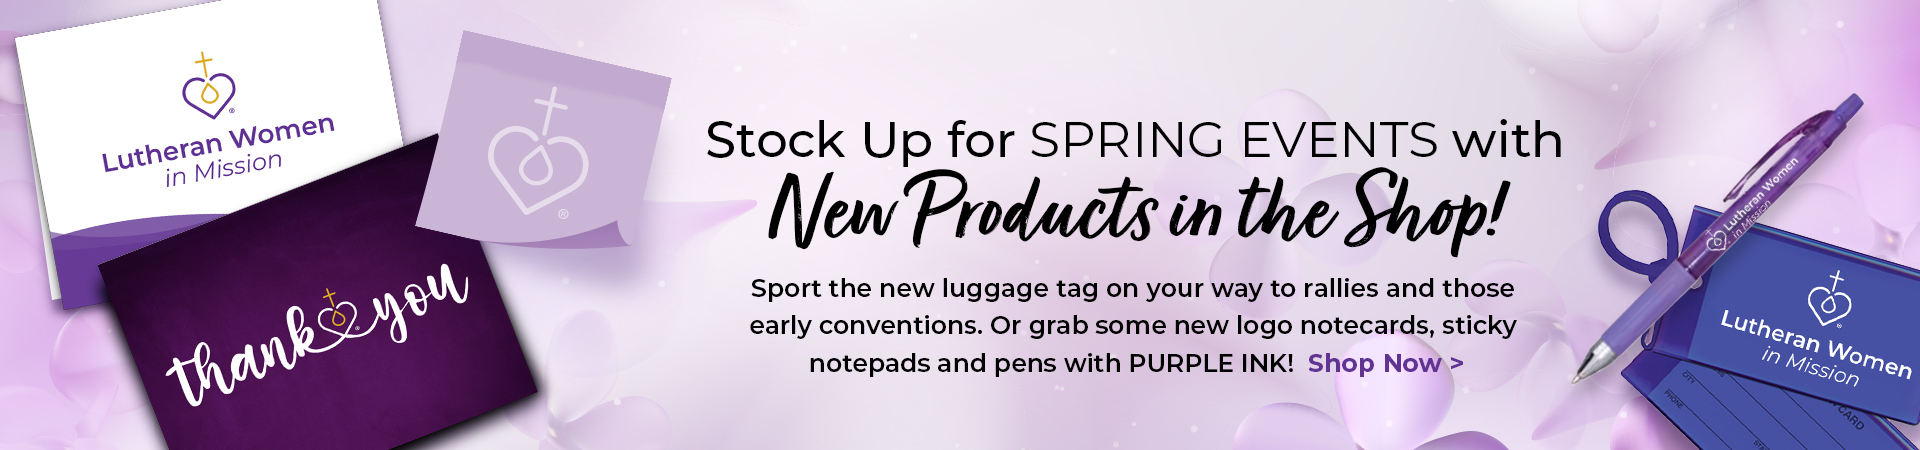 Stock up for spring events with new products in the Shop. Shop Now.